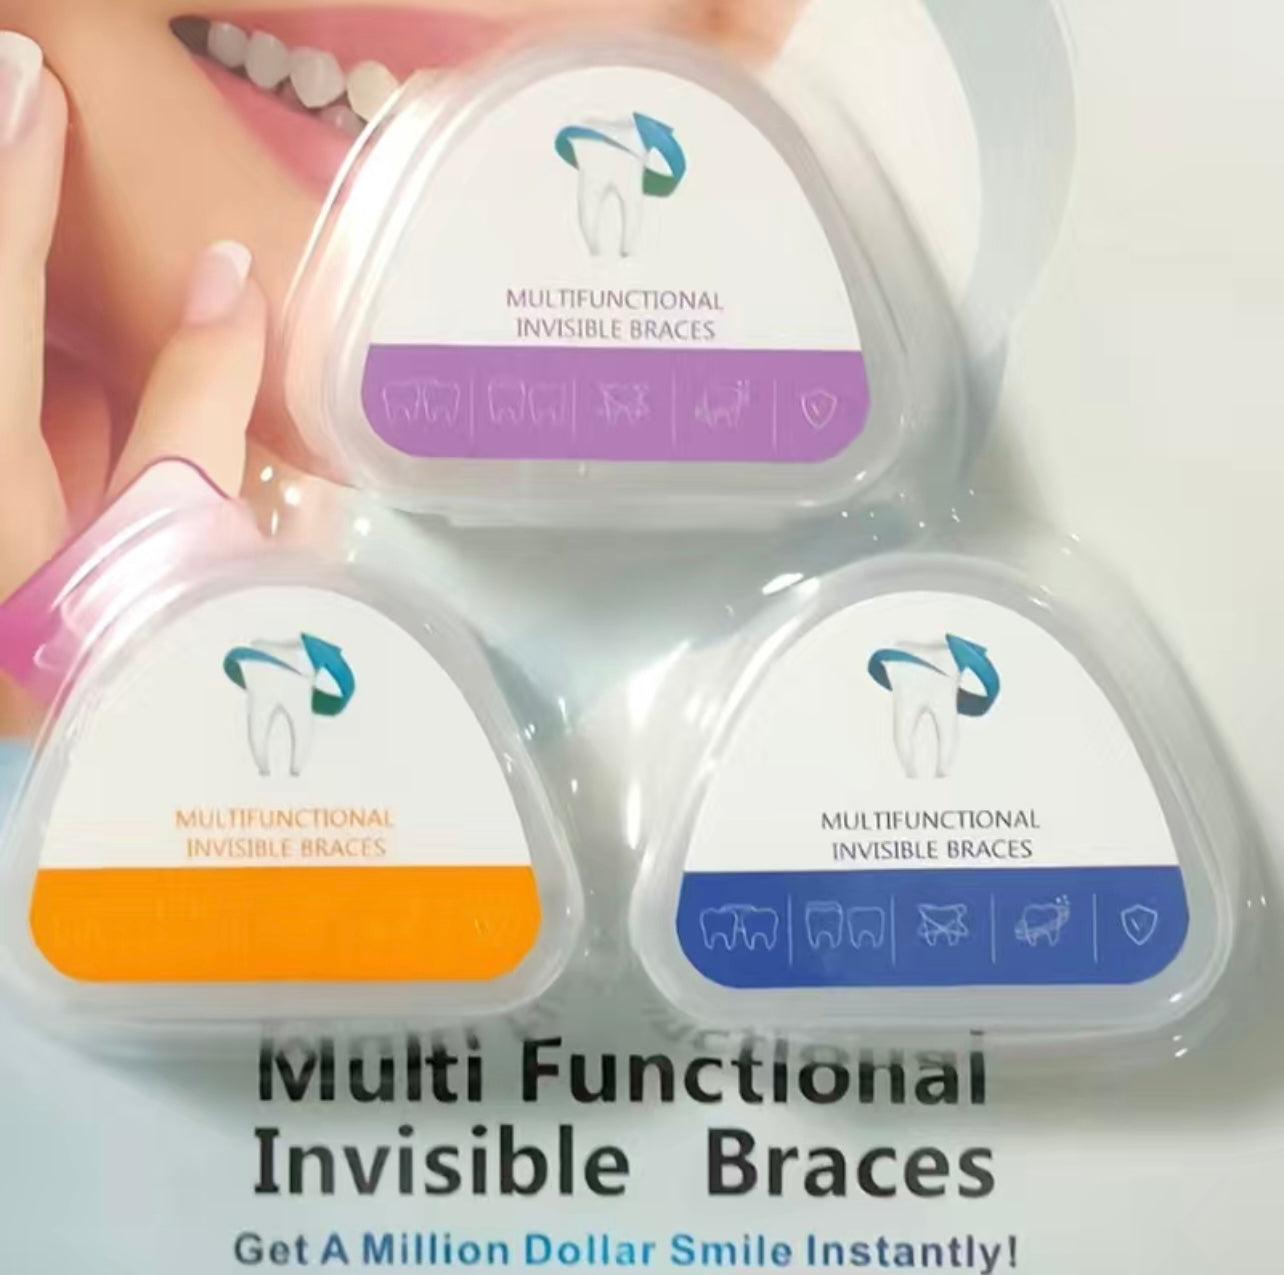 3 Stage Overnight Teeth Aligners - the 3 Phase Night Guard Braces! At home braces. Teeth aligners overnight. Mouth guard. Straighten teeth naturally. Straighten teeth without braces. Veneers. TikTok Viral products. TikTok made me buy it. TikTok famous items